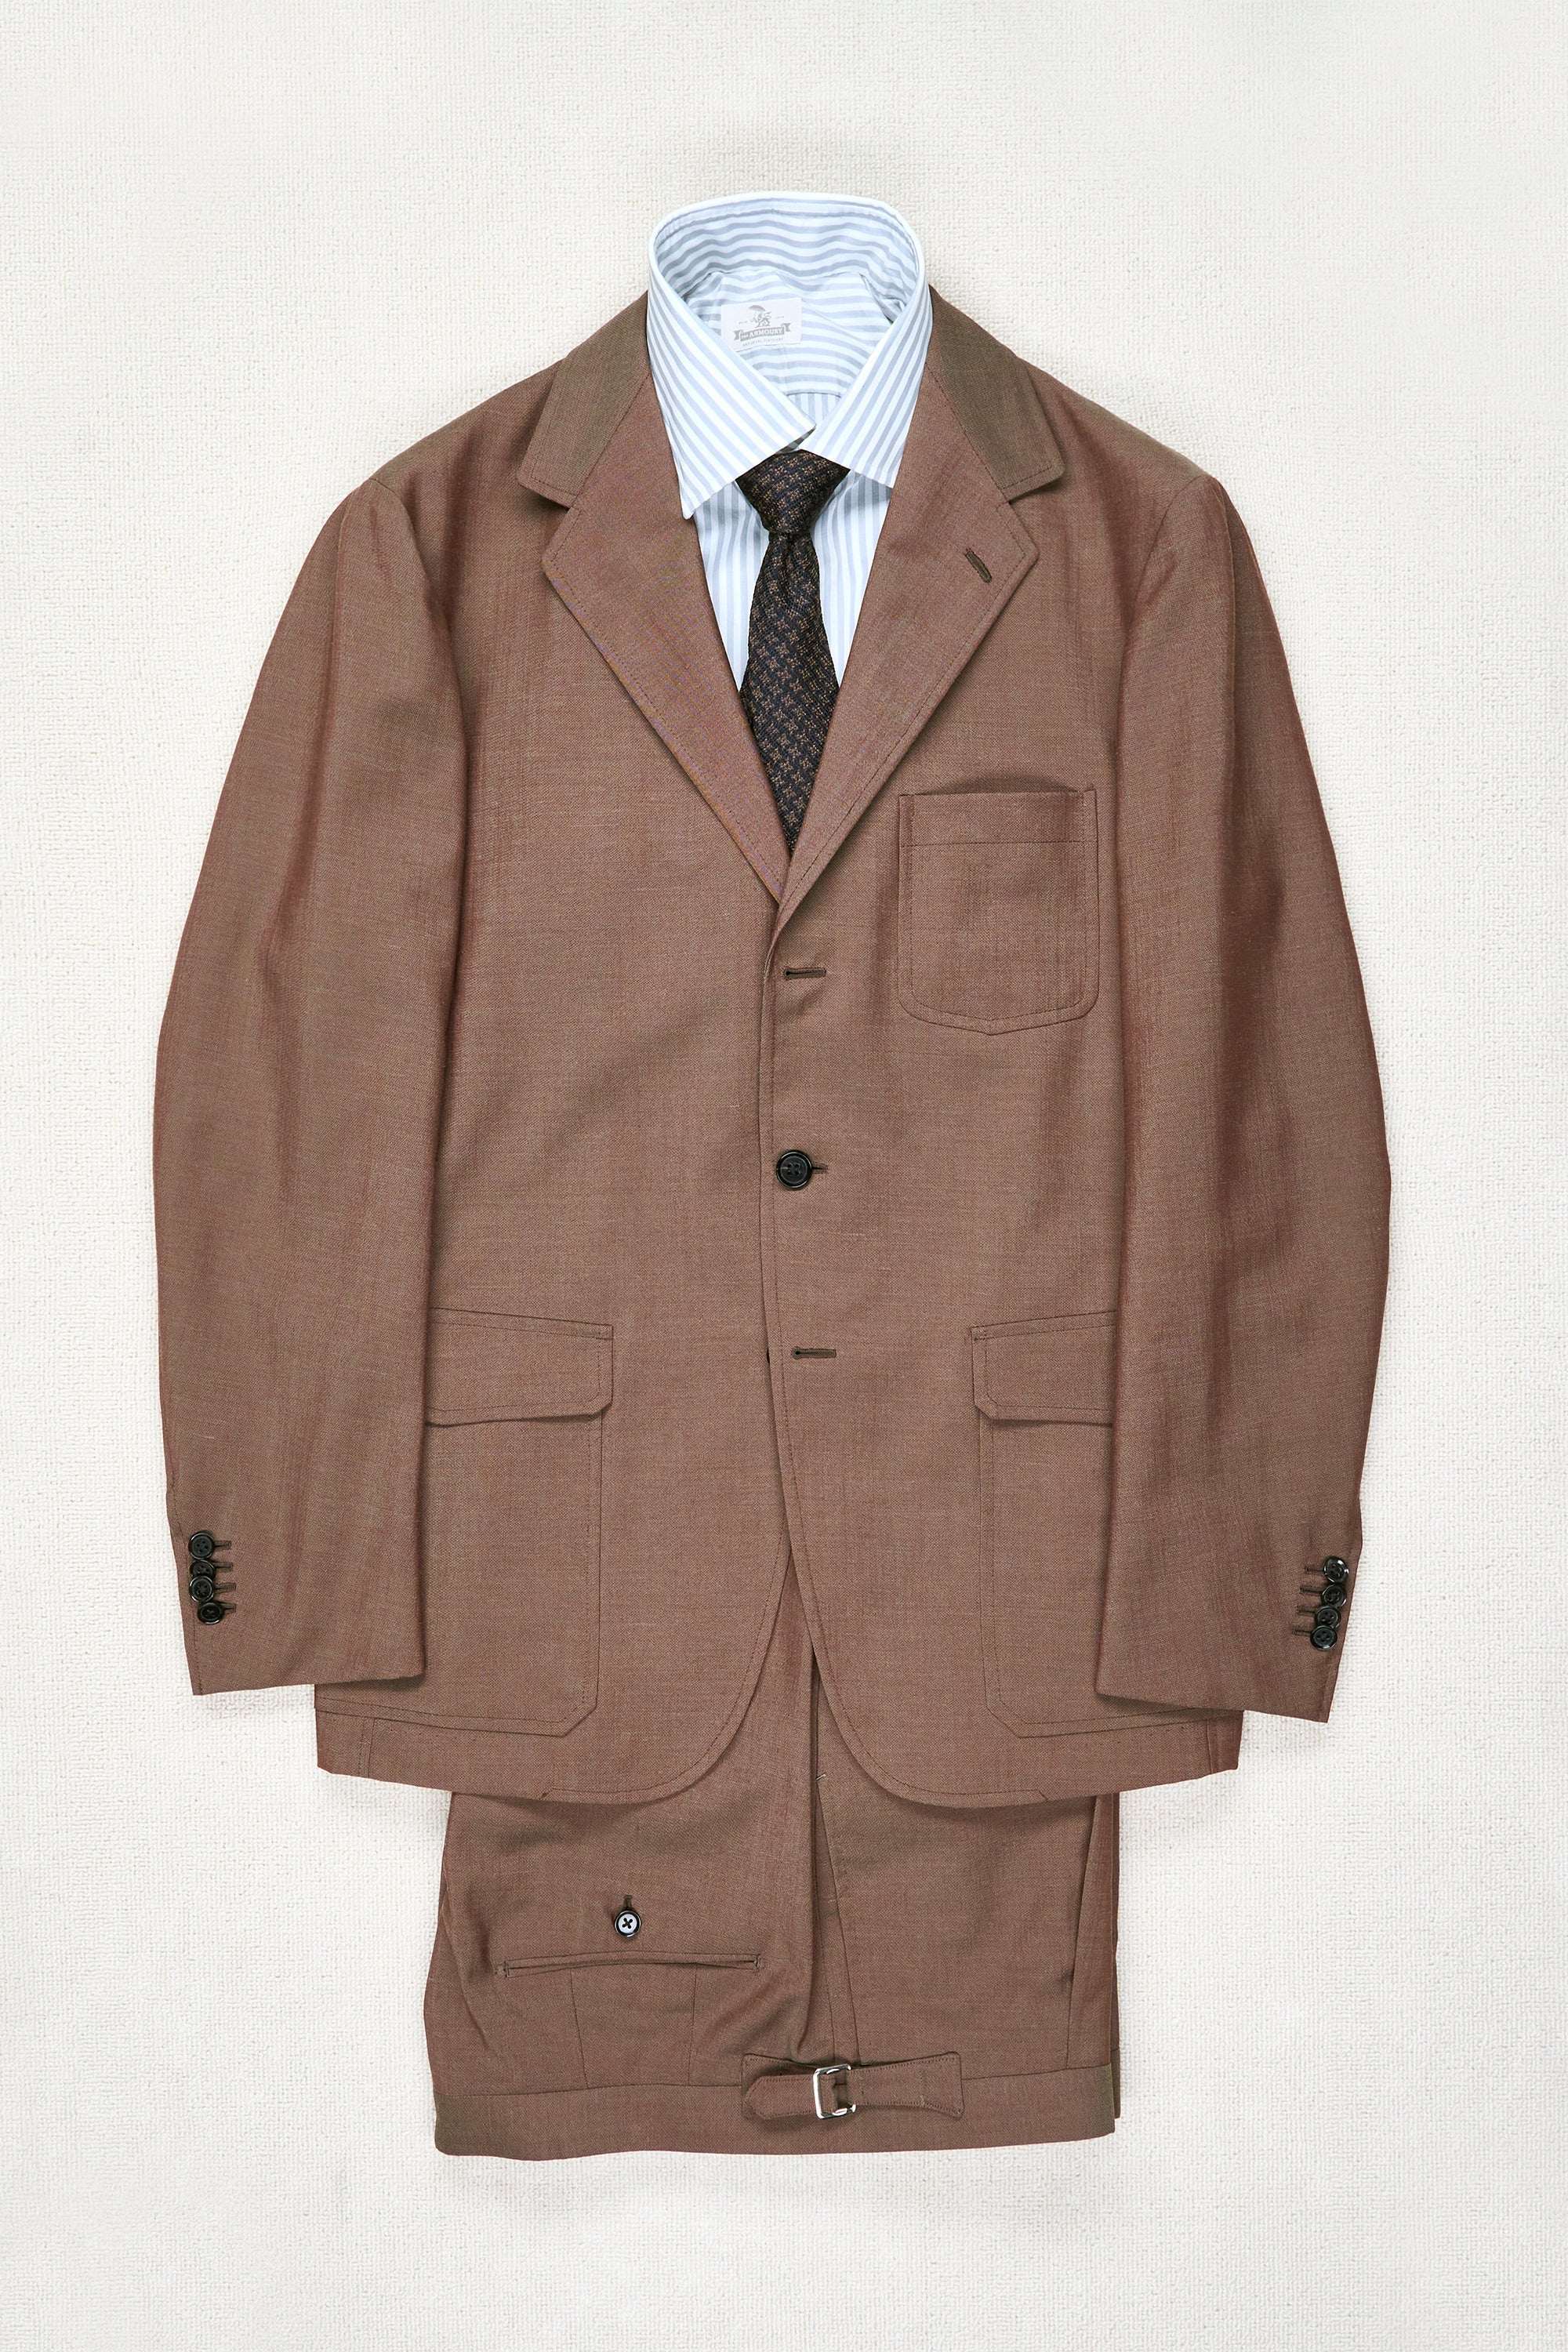 The Armoury by Ring Jacket Model 11B Brown Solaro Wool Suit MTO